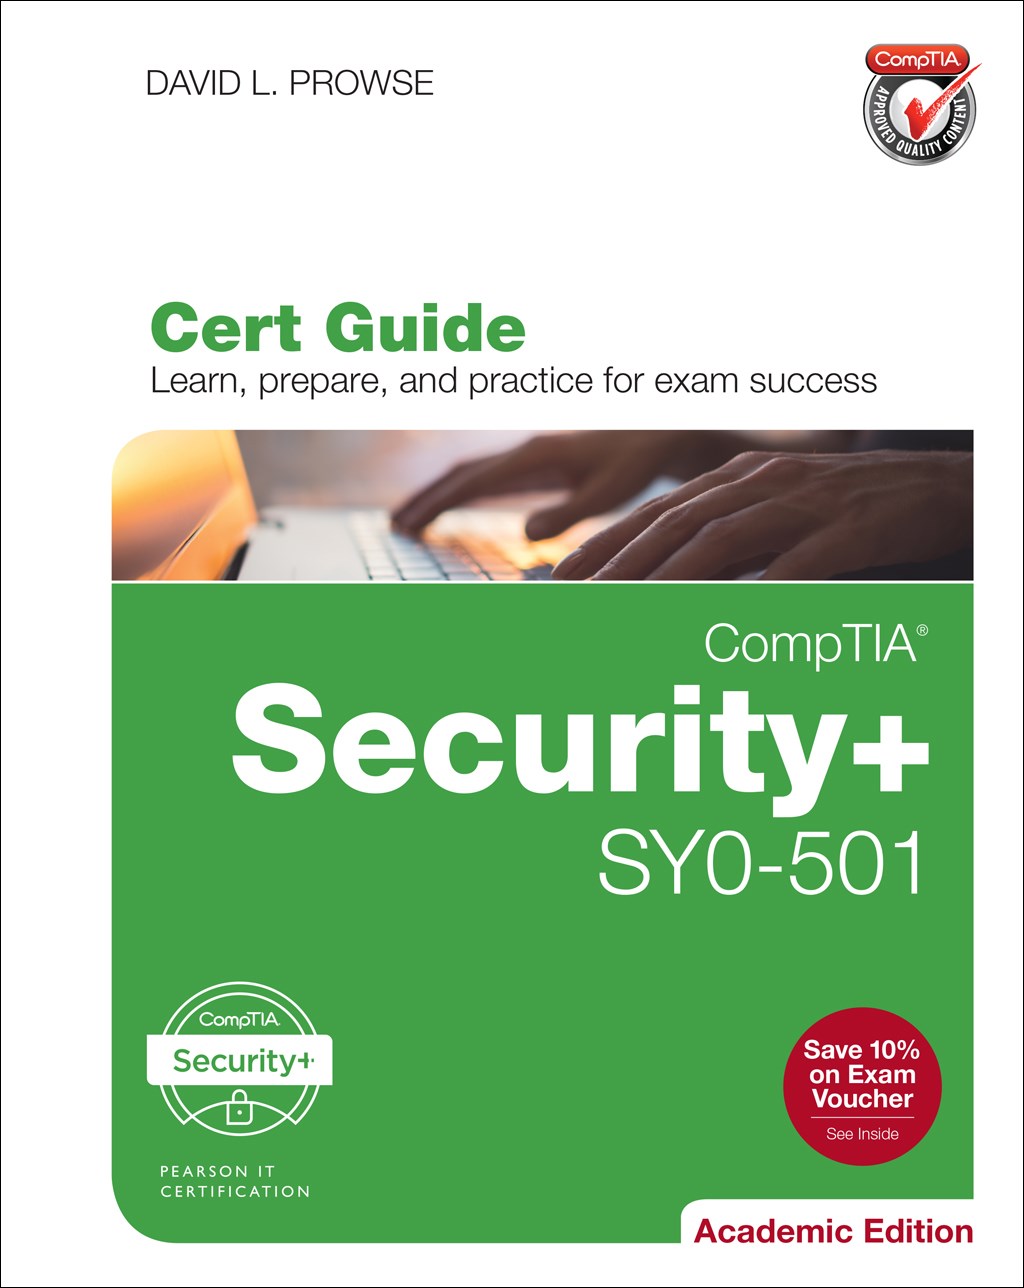 CompTIA Security+ SY0-501 Cert Guide, Academic Edition, 2nd Edition